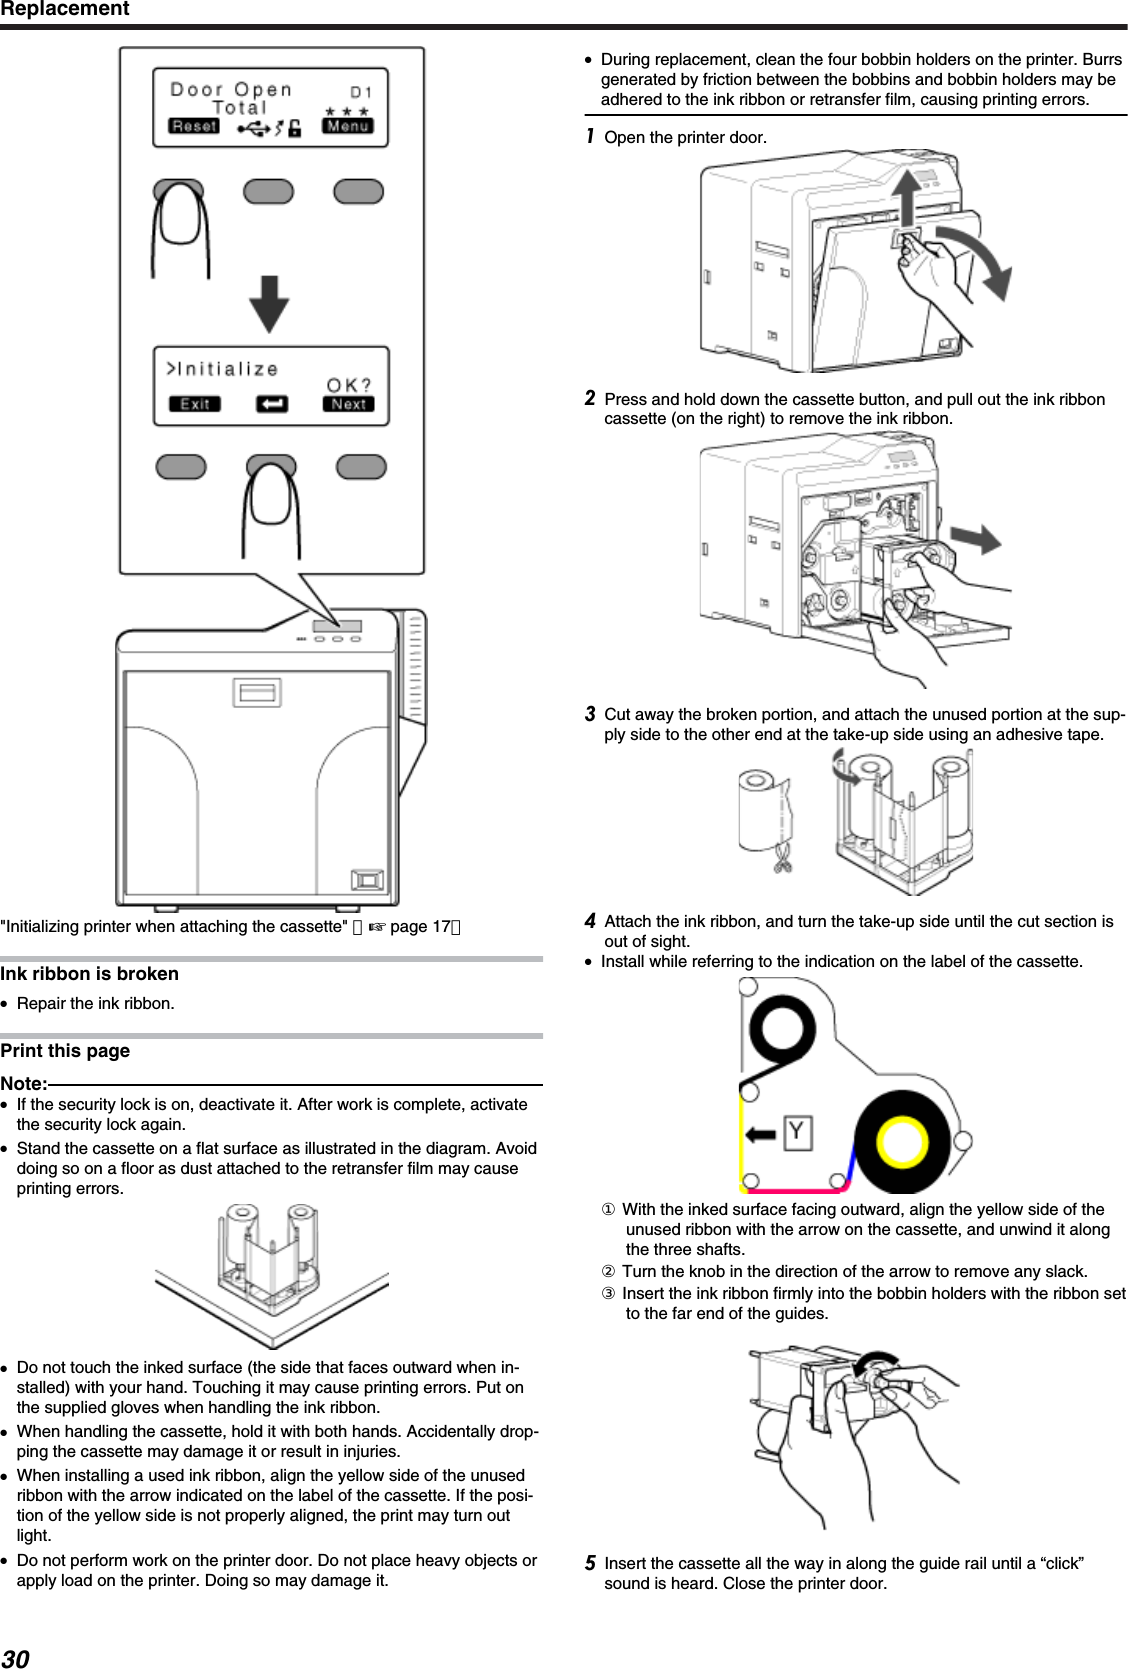 &quot;Initializing printer when attaching the cassette&quot; （&apos; page 17）Ink ribbon is broken●Repair the ink ribbon.Print this pageNote:●If the security lock is on, deactivate it. After work is complete, activatethe security lock again.●Stand the cassette on a flat surface as illustrated in the diagram. Avoiddoing so on a floor as dust attached to the retransfer film may causeprinting errors.●Do not touch the inked surface (the side that faces outward when in-stalled) with your hand. Touching it may cause printing errors. Put onthe supplied gloves when handling the ink ribbon.●When handling the cassette, hold it with both hands. Accidentally drop-ping the cassette may damage it or result in injuries.●When installing a used ink ribbon, align the yellow side of the unusedribbon with the arrow indicated on the label of the cassette. If the posi-tion of the yellow side is not properly aligned, the print may turn outlight.●Do not perform work on the printer door. Do not place heavy objects orapply load on the printer. Doing so may damage it.●During replacement, clean the four bobbin holders on the printer. Burrsgenerated by friction between the bobbins and bobbin holders may beadhered to the ink ribbon or retransfer film, causing printing errors.Open the printer door.Press and hold down the cassette button, and pull out the ink ribboncassette (on the right) to remove the ink ribbon.Cut away the broken portion, and attach the unused portion at the sup-ply side to the other end at the take-up side using an adhesive tape.Attach the ink ribbon, and turn the take-up side until the cut section isout of sight.●Install while referring to the indication on the label of the cassette.① With the inked surface facing outward, align the yellow side of theunused ribbon with the arrow on the cassette, and unwind it alongthe three shafts.② Turn the knob in the direction of the arrow to remove any slack.③ Insert the ink ribbon firmly into the bobbin holders with the ribbon setto the far end of the guides.Insert the cassette all the way in along the guide rail until a “click”sound is heard. Close the printer door.Replacement30